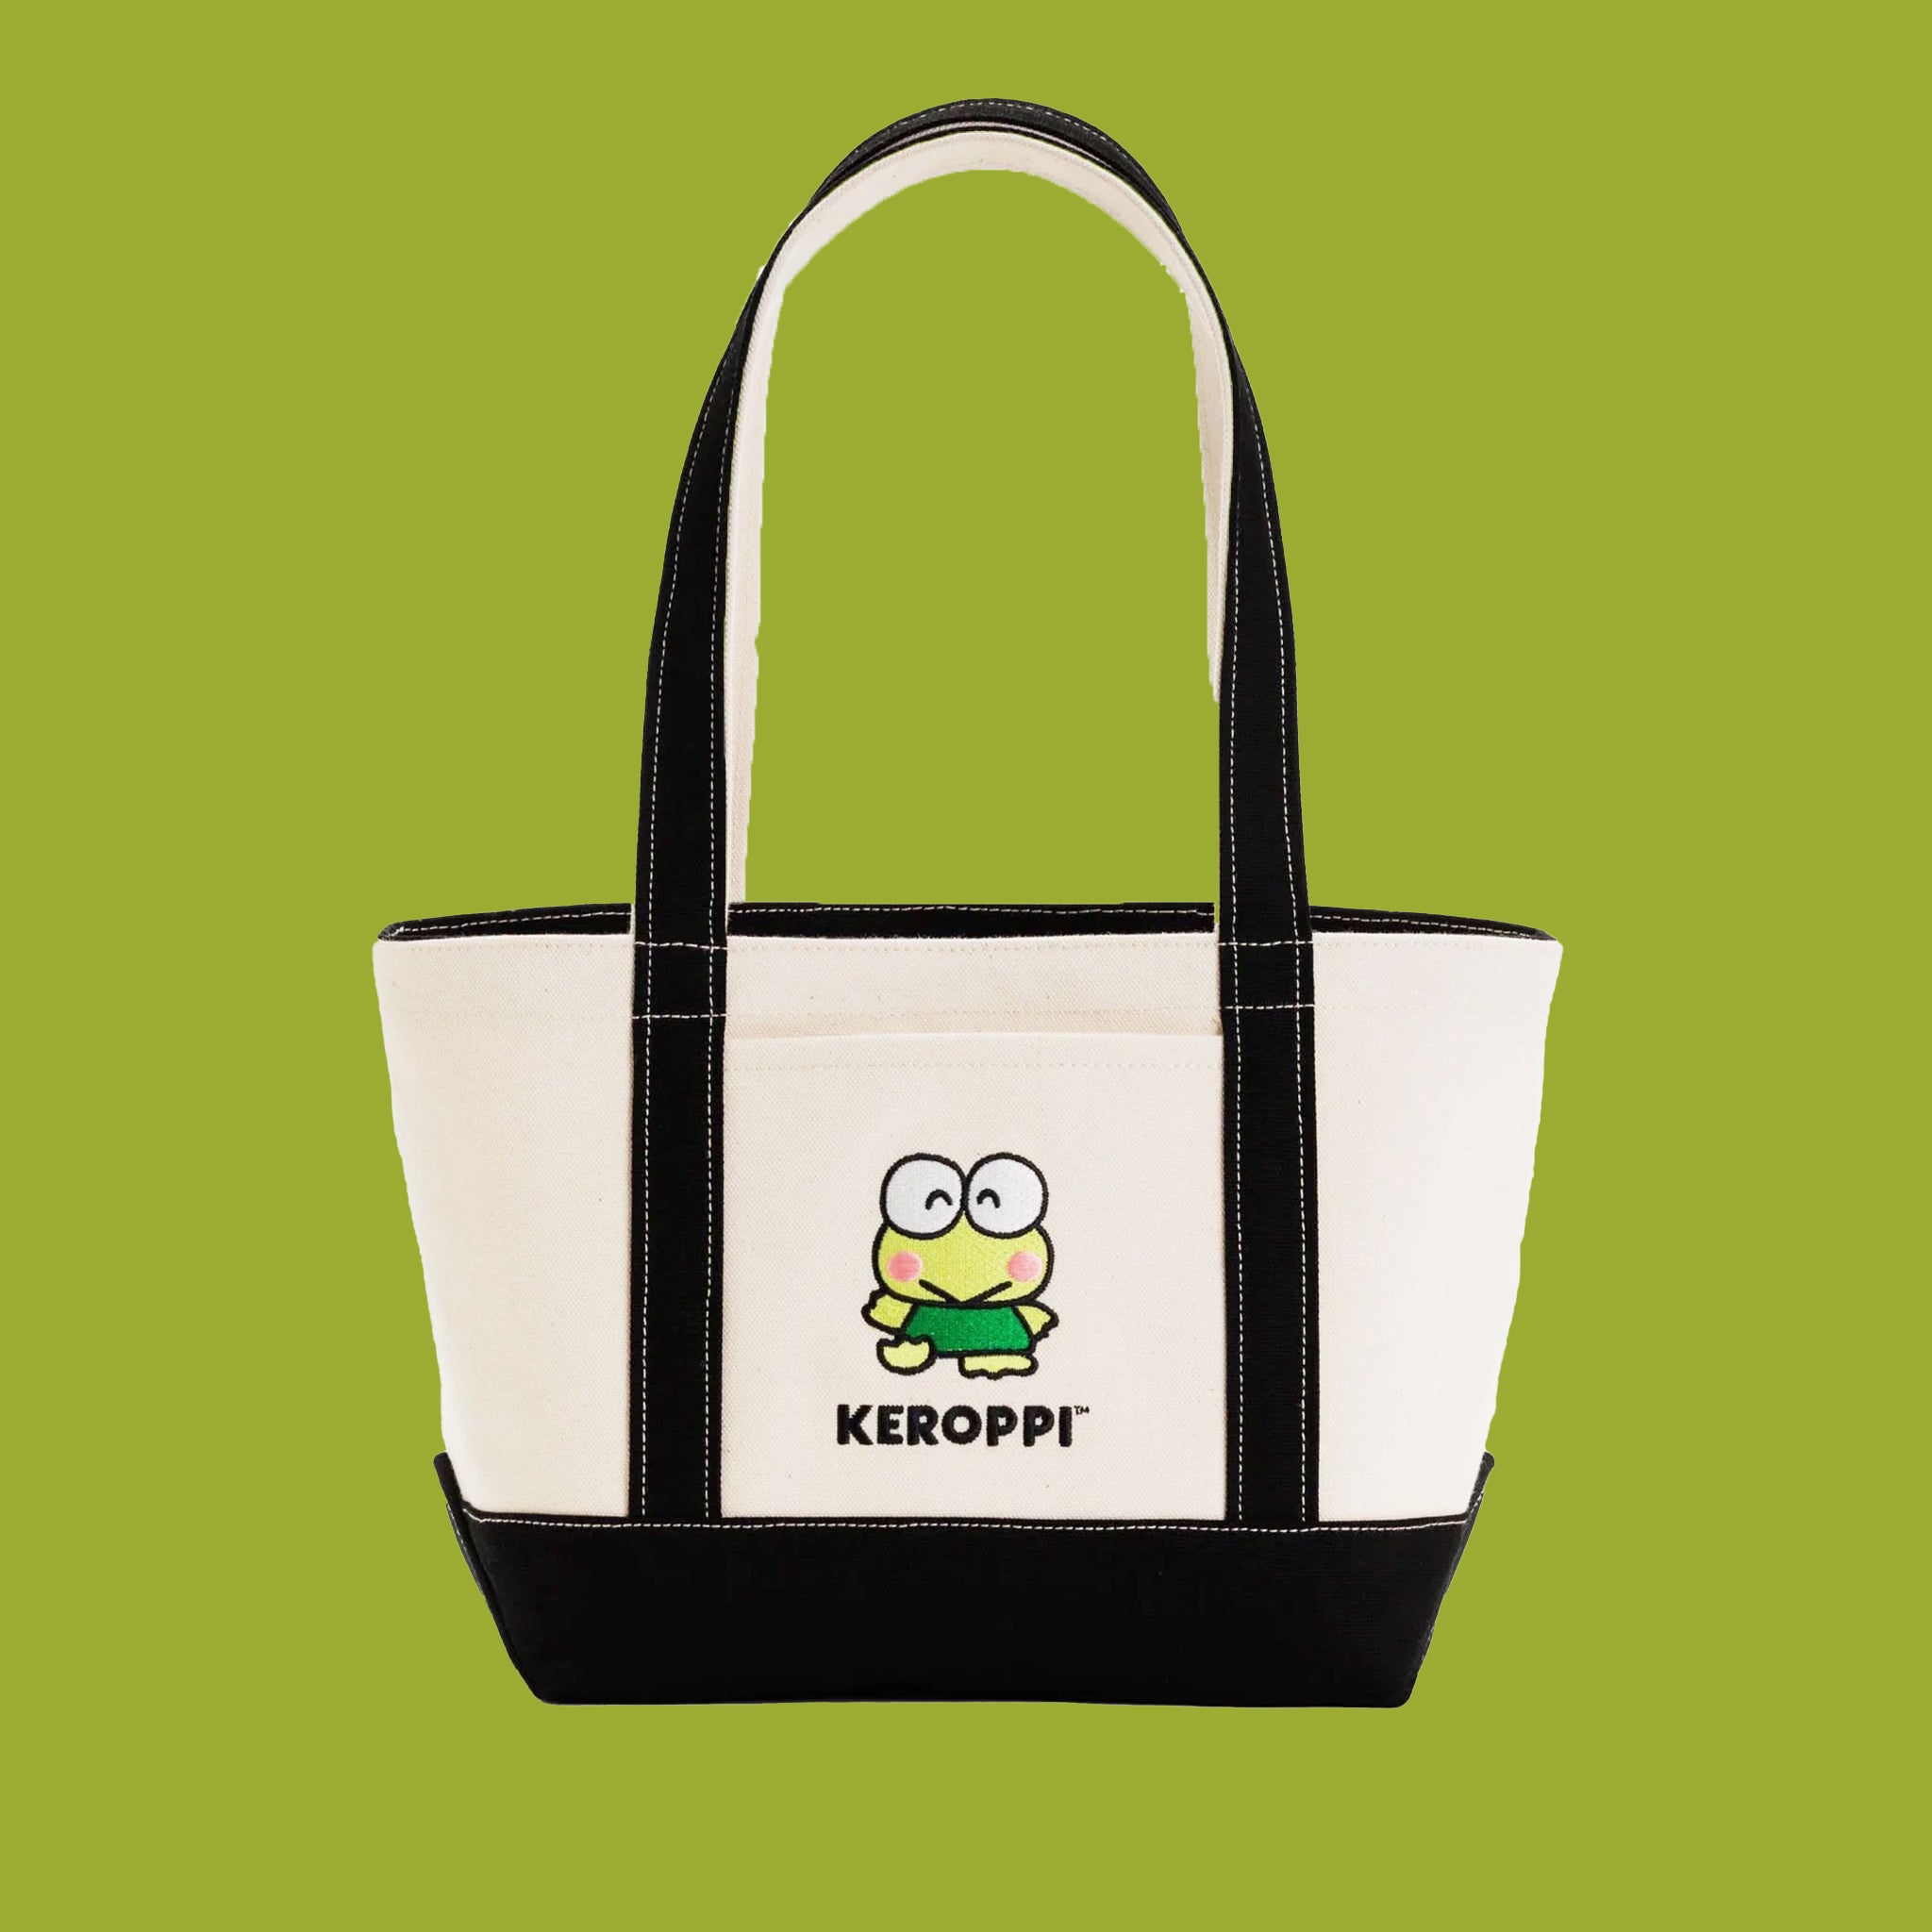 On a light green background is a black and ivory tote bag with an embroidered Keroppi on the front.